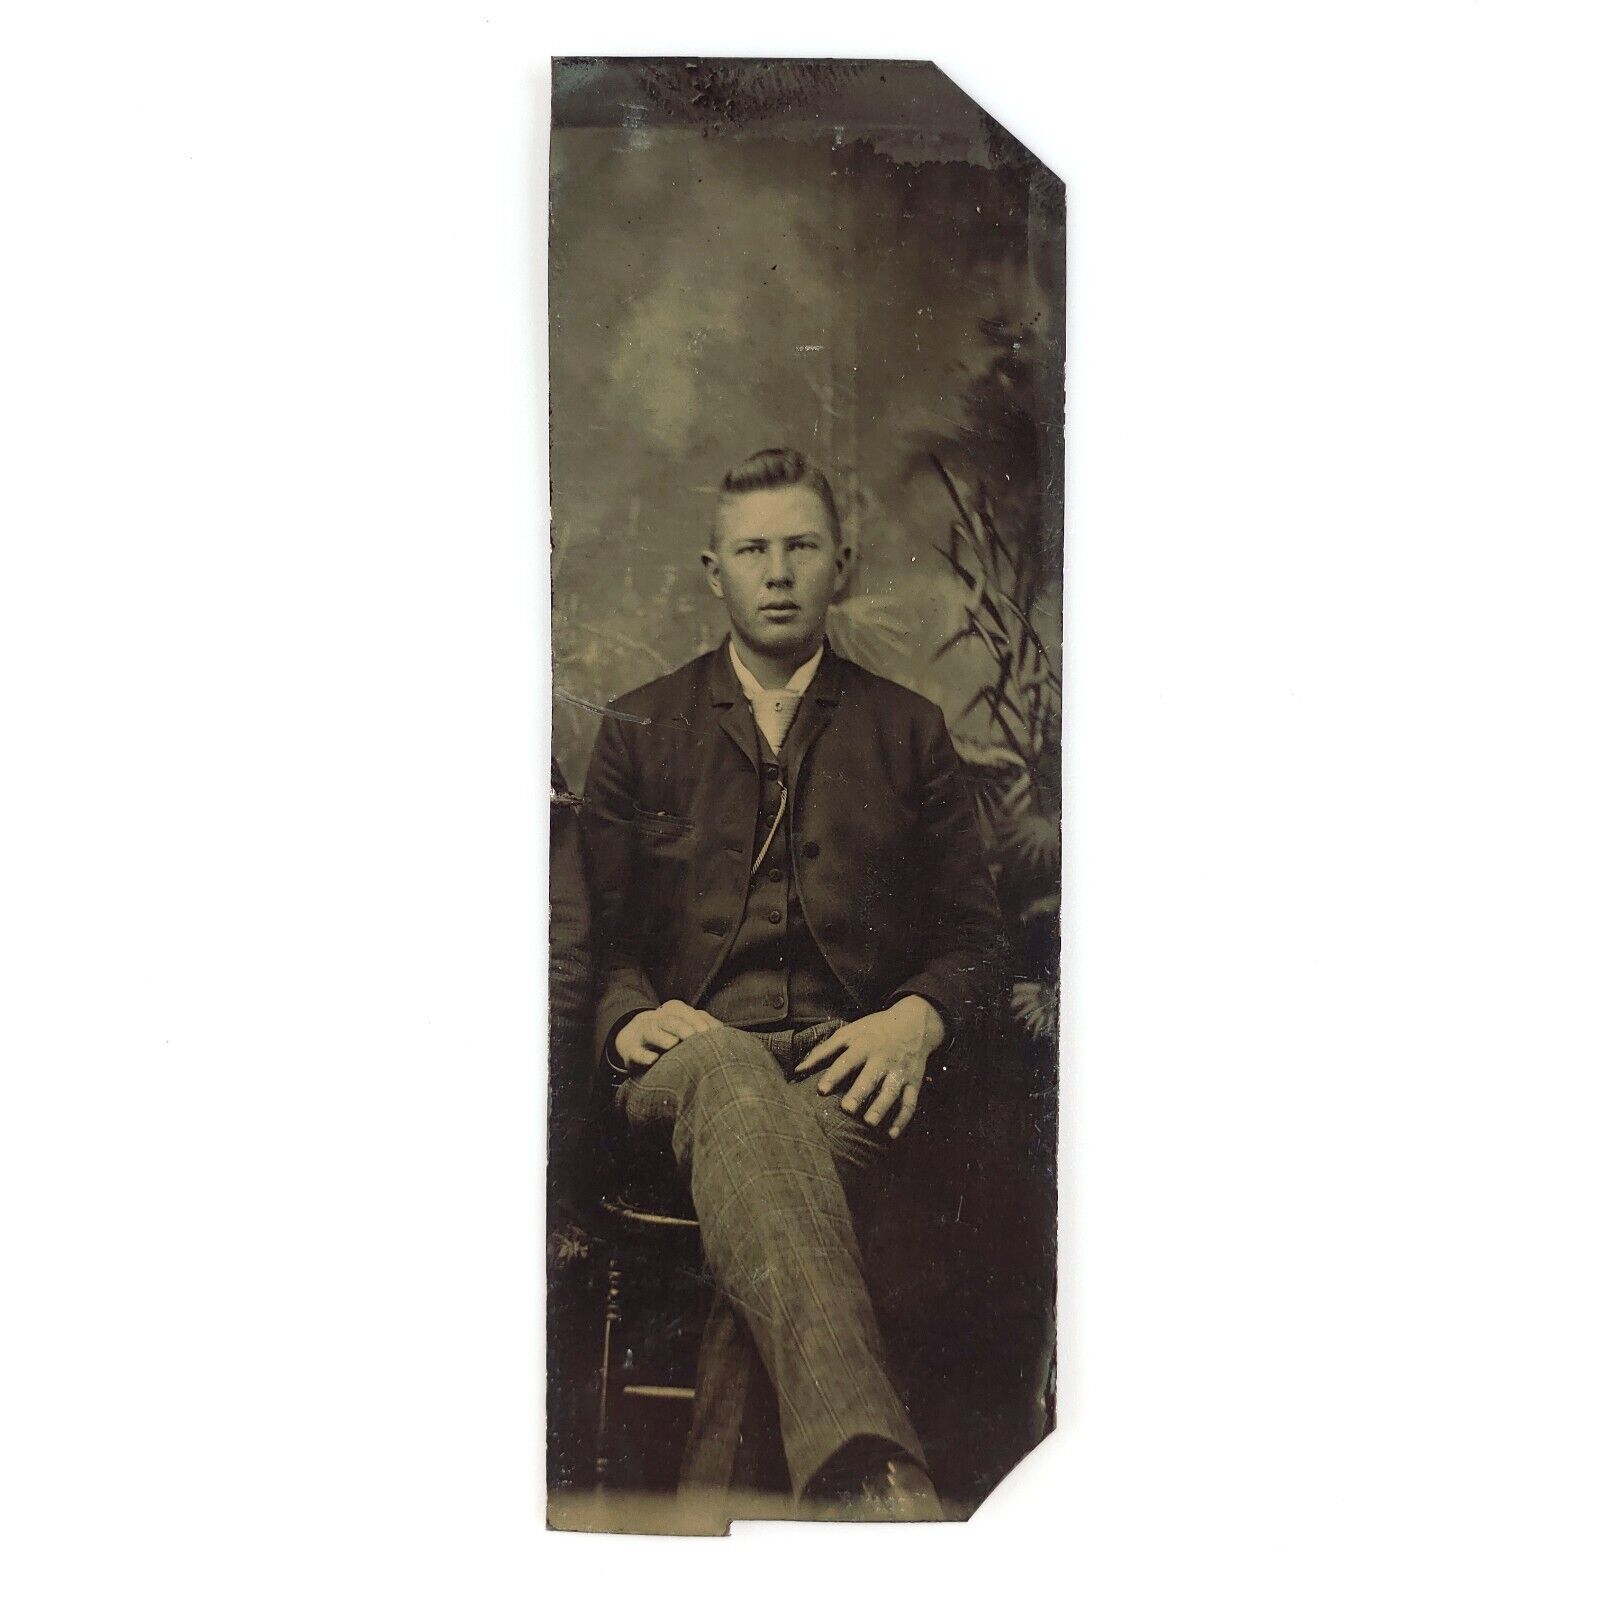 Hated Cutoff Seated Man Tintype c1870 Antique 1/6 Plate Chair Sitter Photo B3149